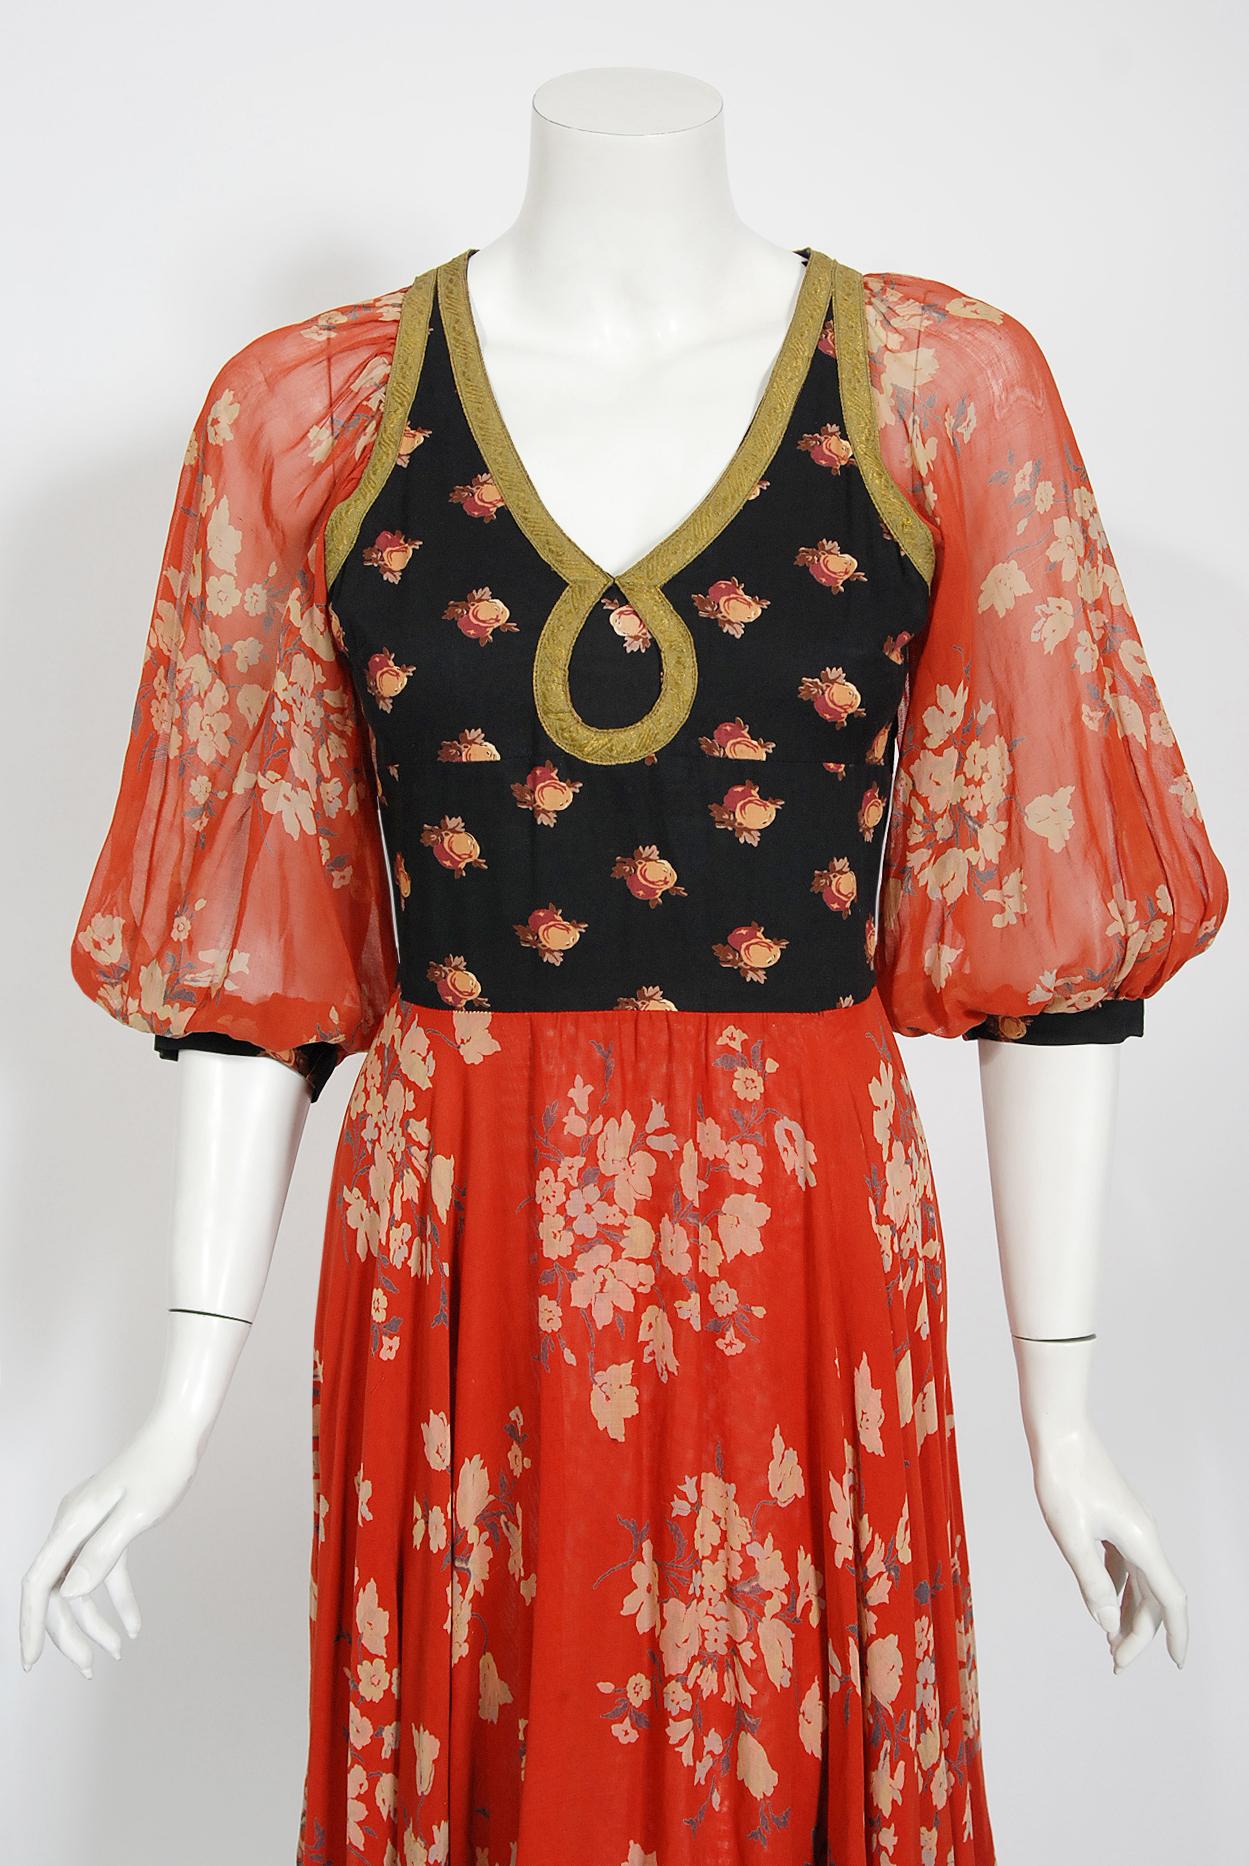 Women's Vintage 1971 Thea Porter Documented Black & Red Floral Print Cotton Gypsy Dress 